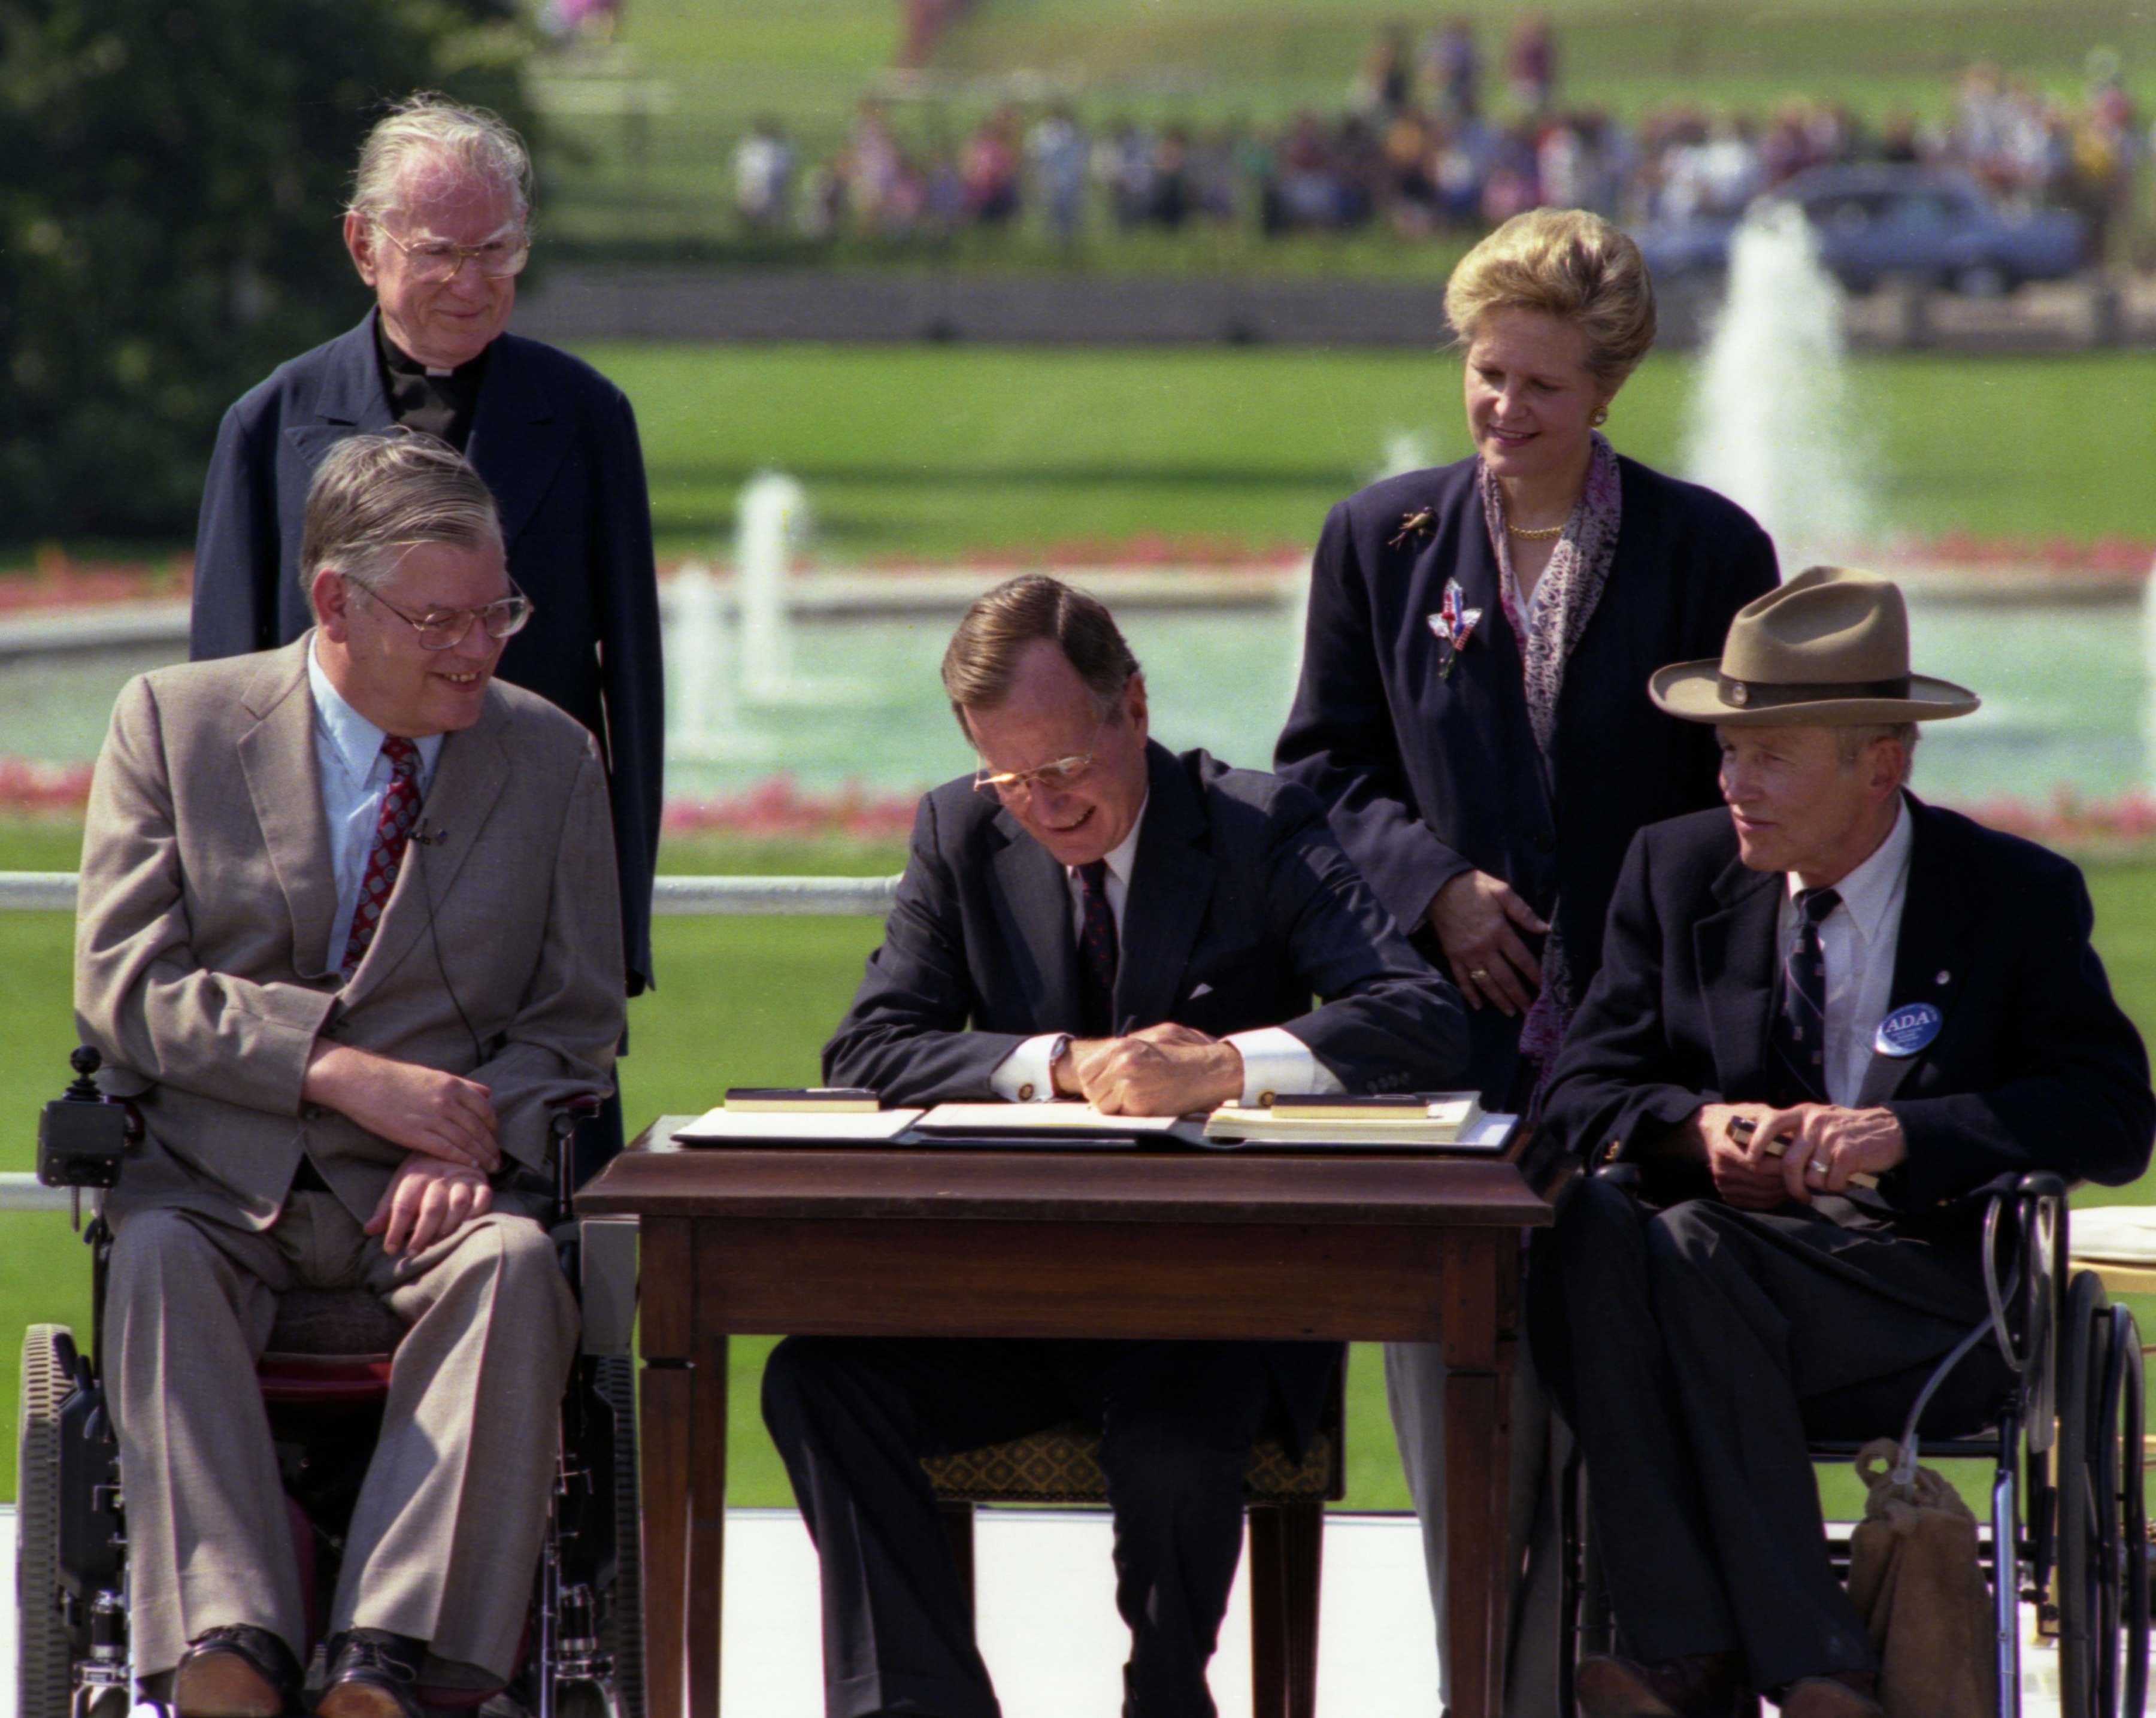 President George H. W. Bush Signs the Americans with Disabilities Act, 07/26/1990.^[[Image](https://www.flickr.com/photos/usnationalarchives/11192009475) is in the public domain]